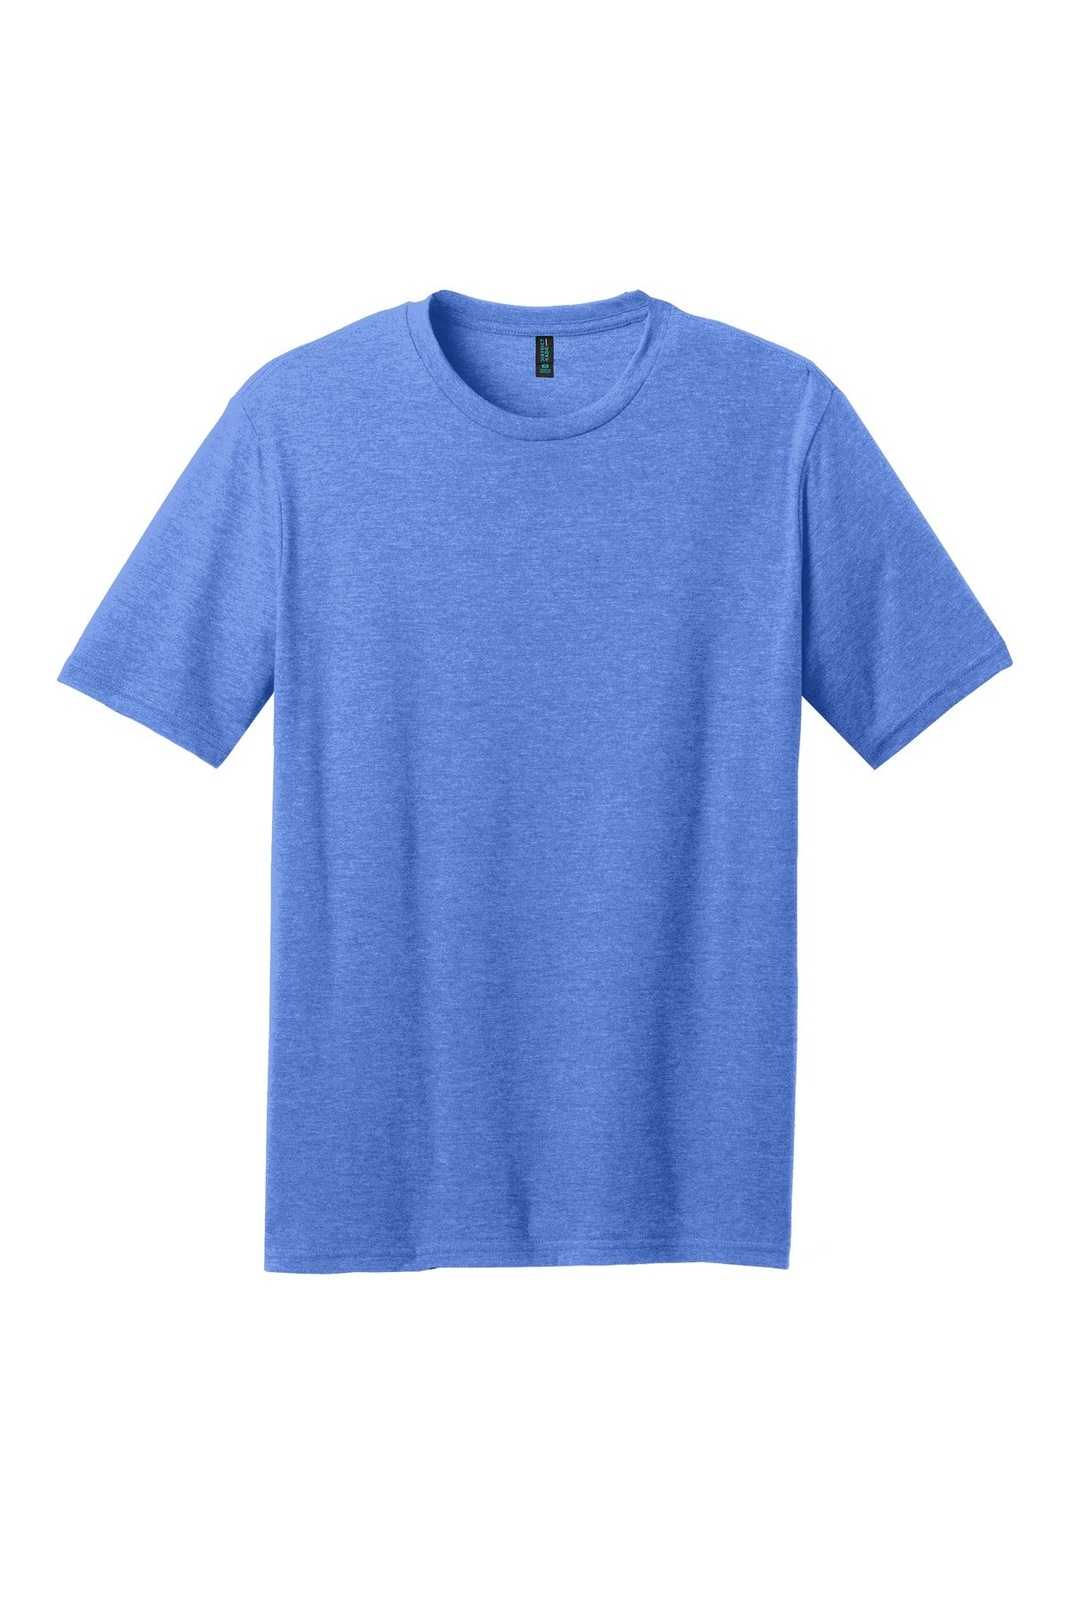 District DM108 Perfect Blend Tee - Heathered Royal - HIT a Double - 5